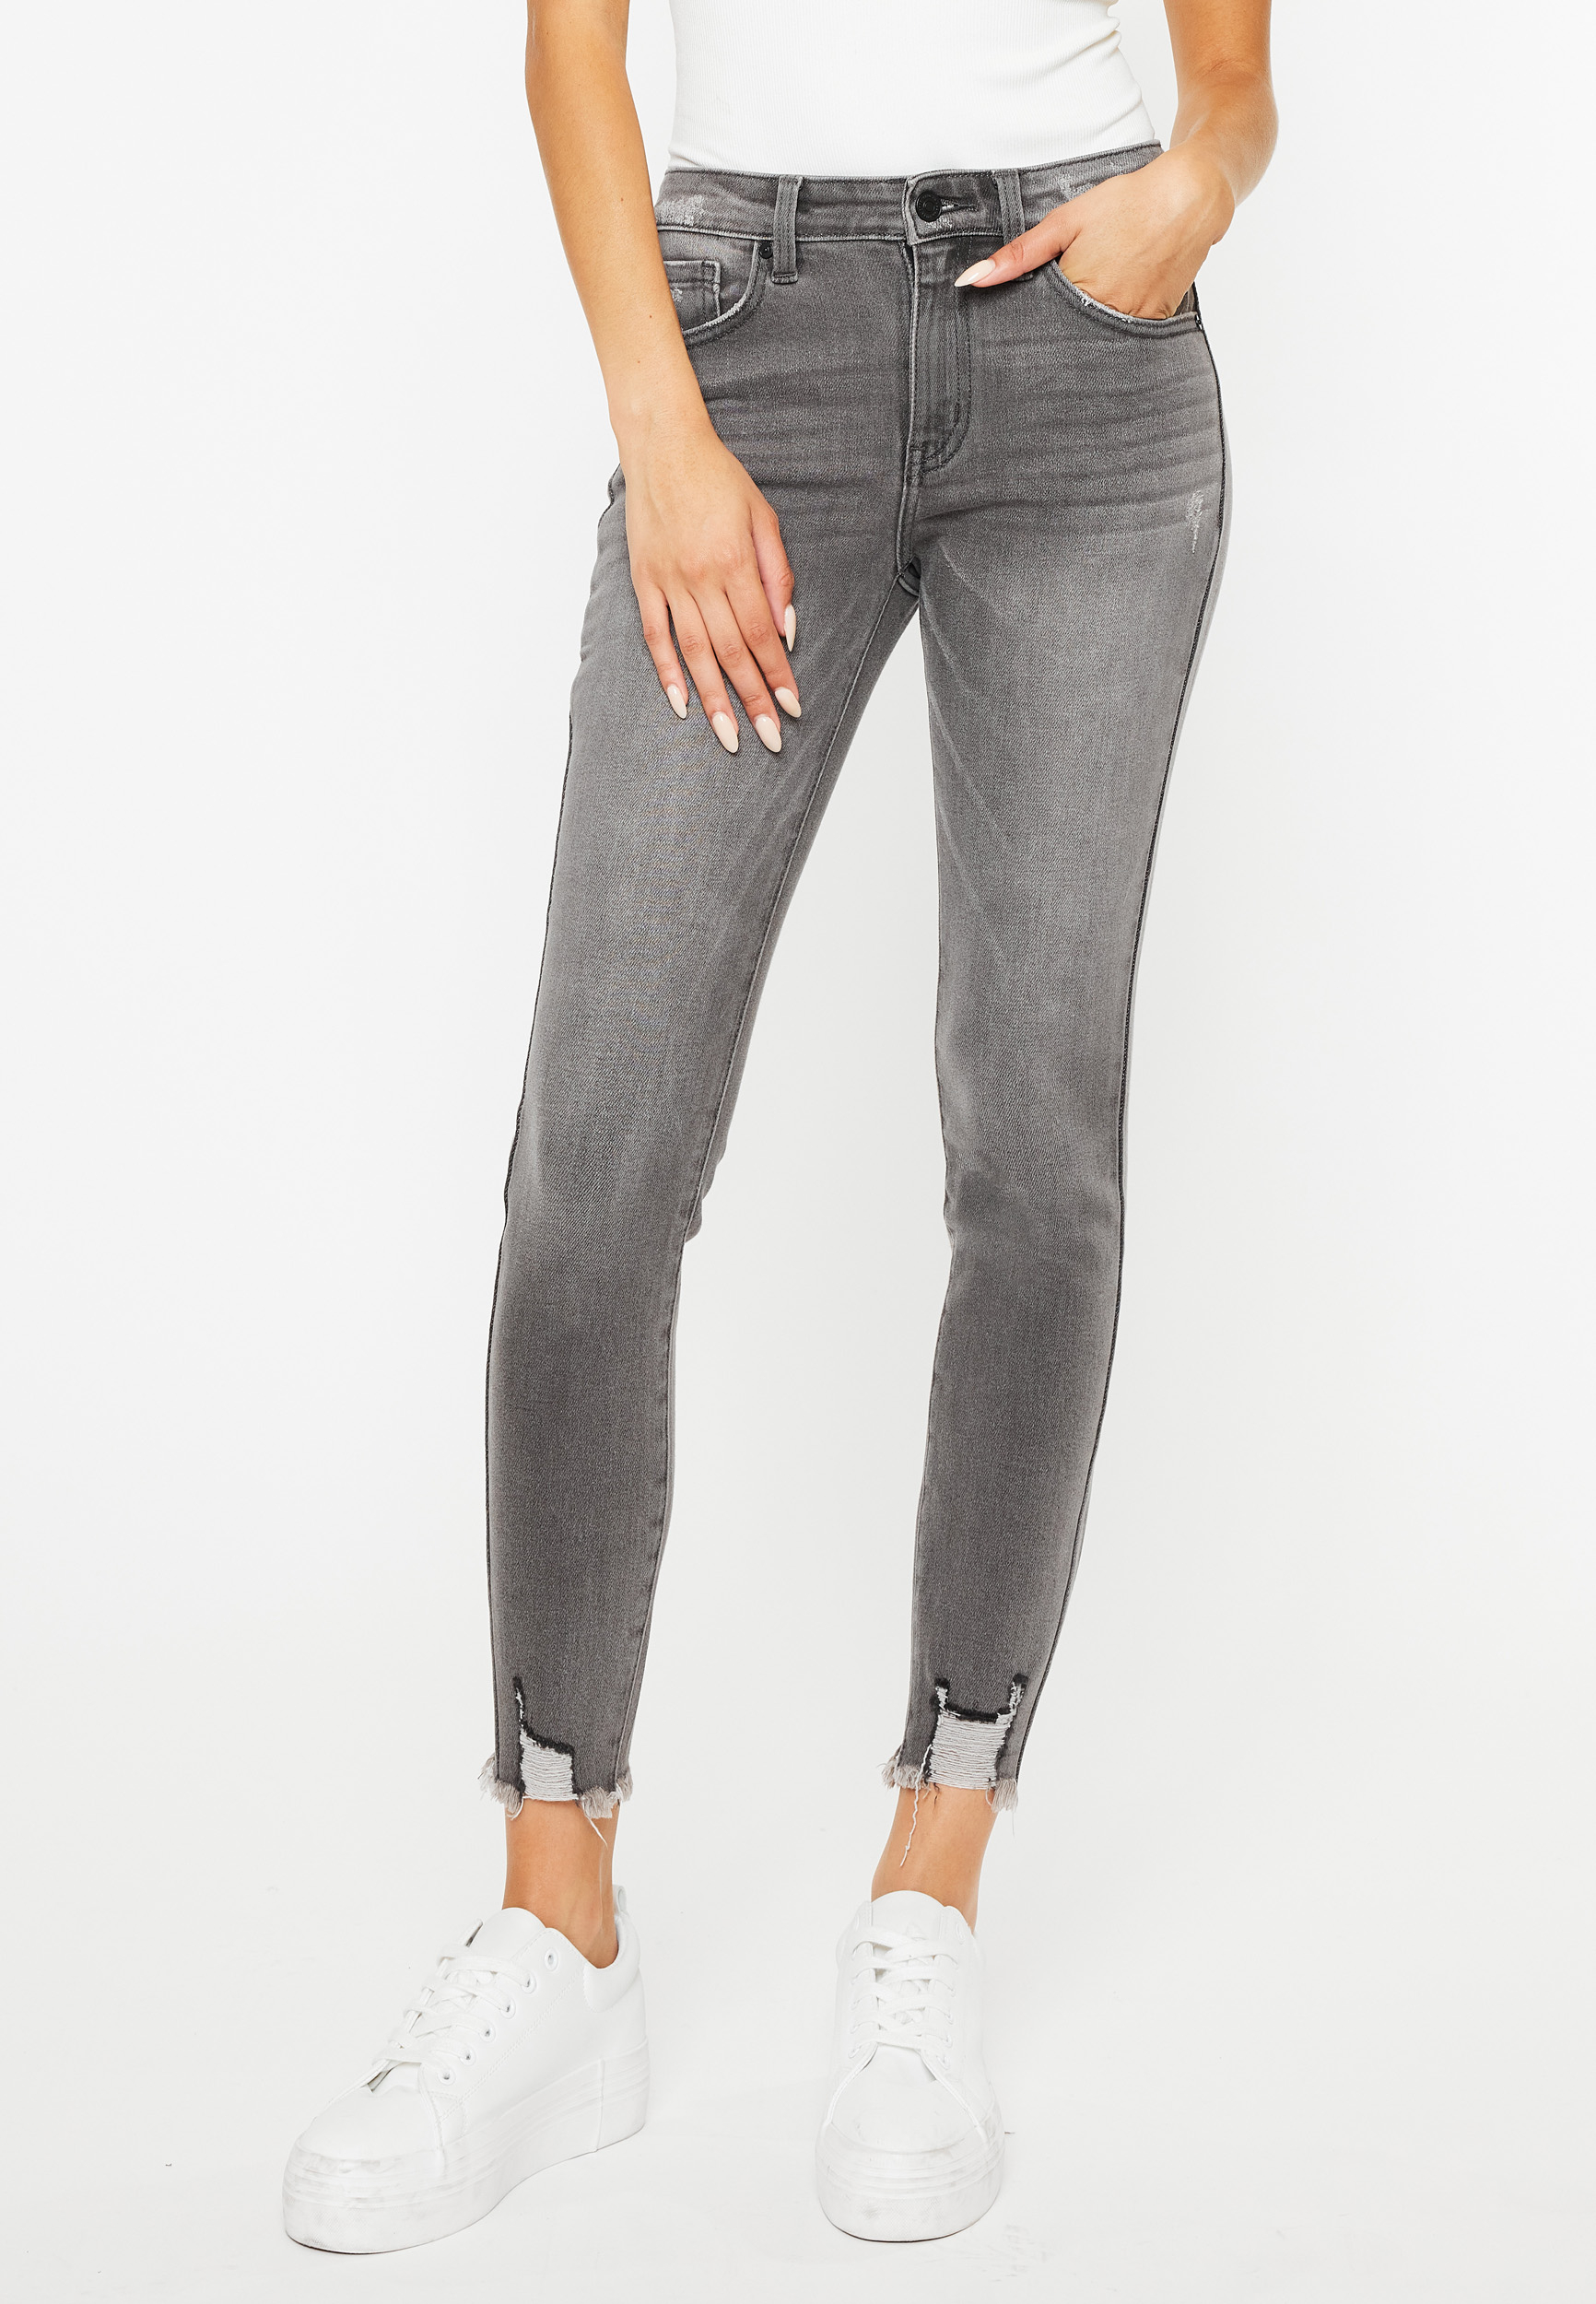 KanCan™ Flare High Rise Ripped Jean